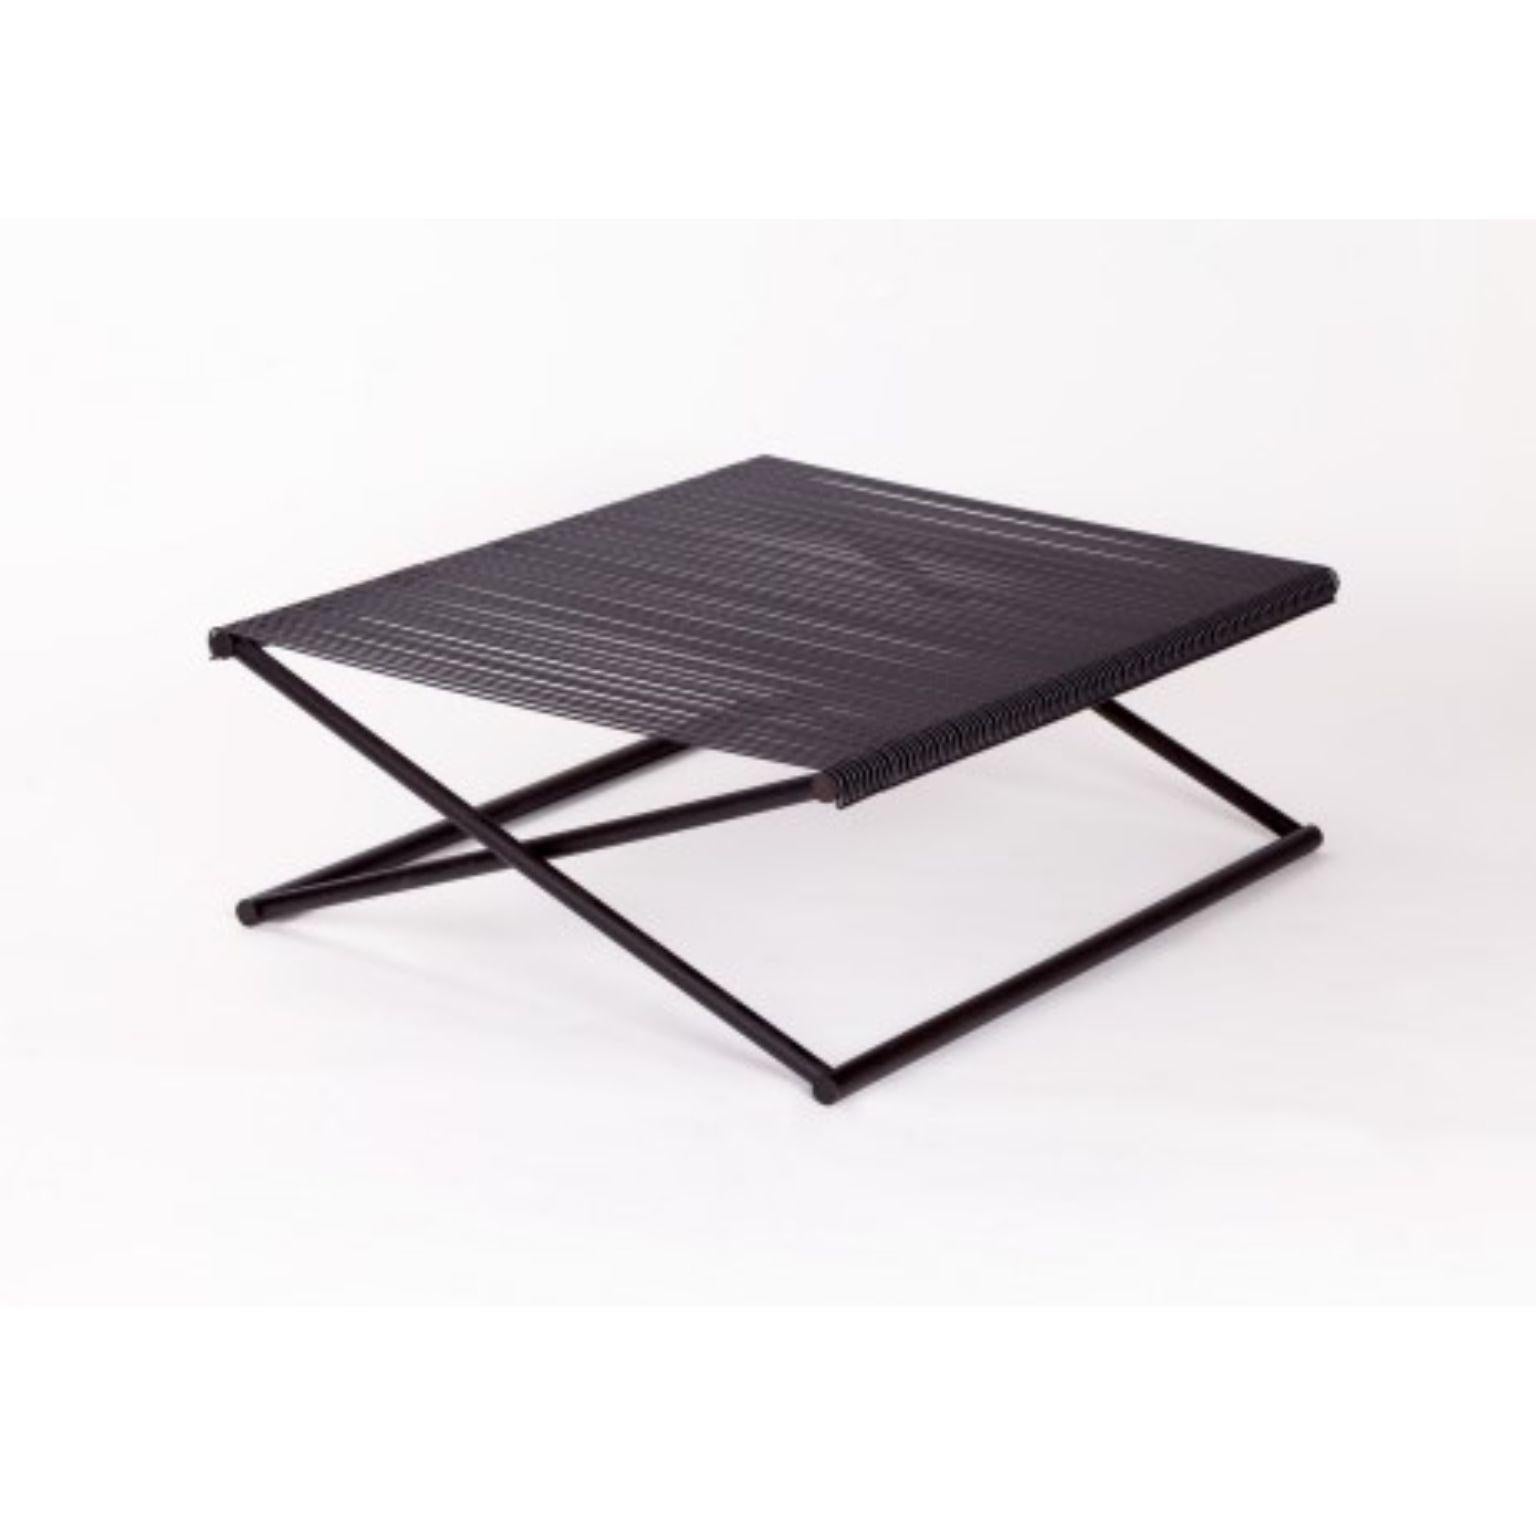 Trestle coffee table by Mingardo
Dimensions: D 96 x W 80 x H 32 cm 
Materials: Ral 9005 black varnished iron structure and rods top
Weight: 26 kg

Also available in different finishes.

The tables of Trestle collection are composed by an oak